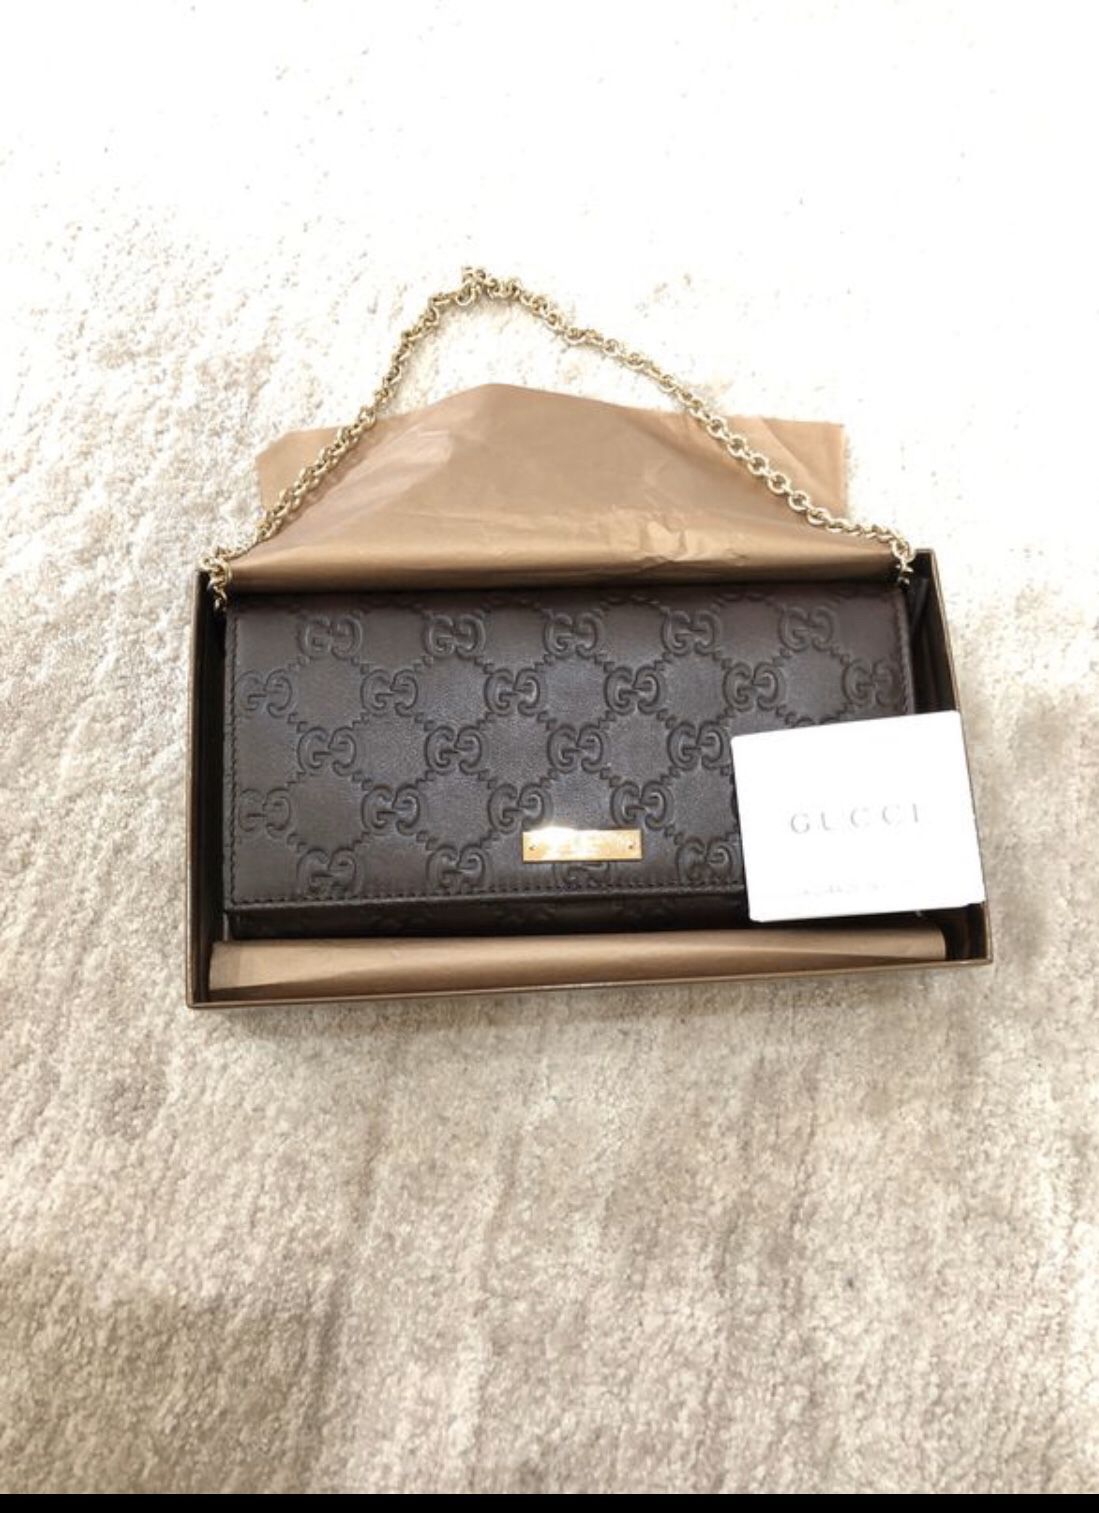 Gucci Chain Wallet - Brand New!!!